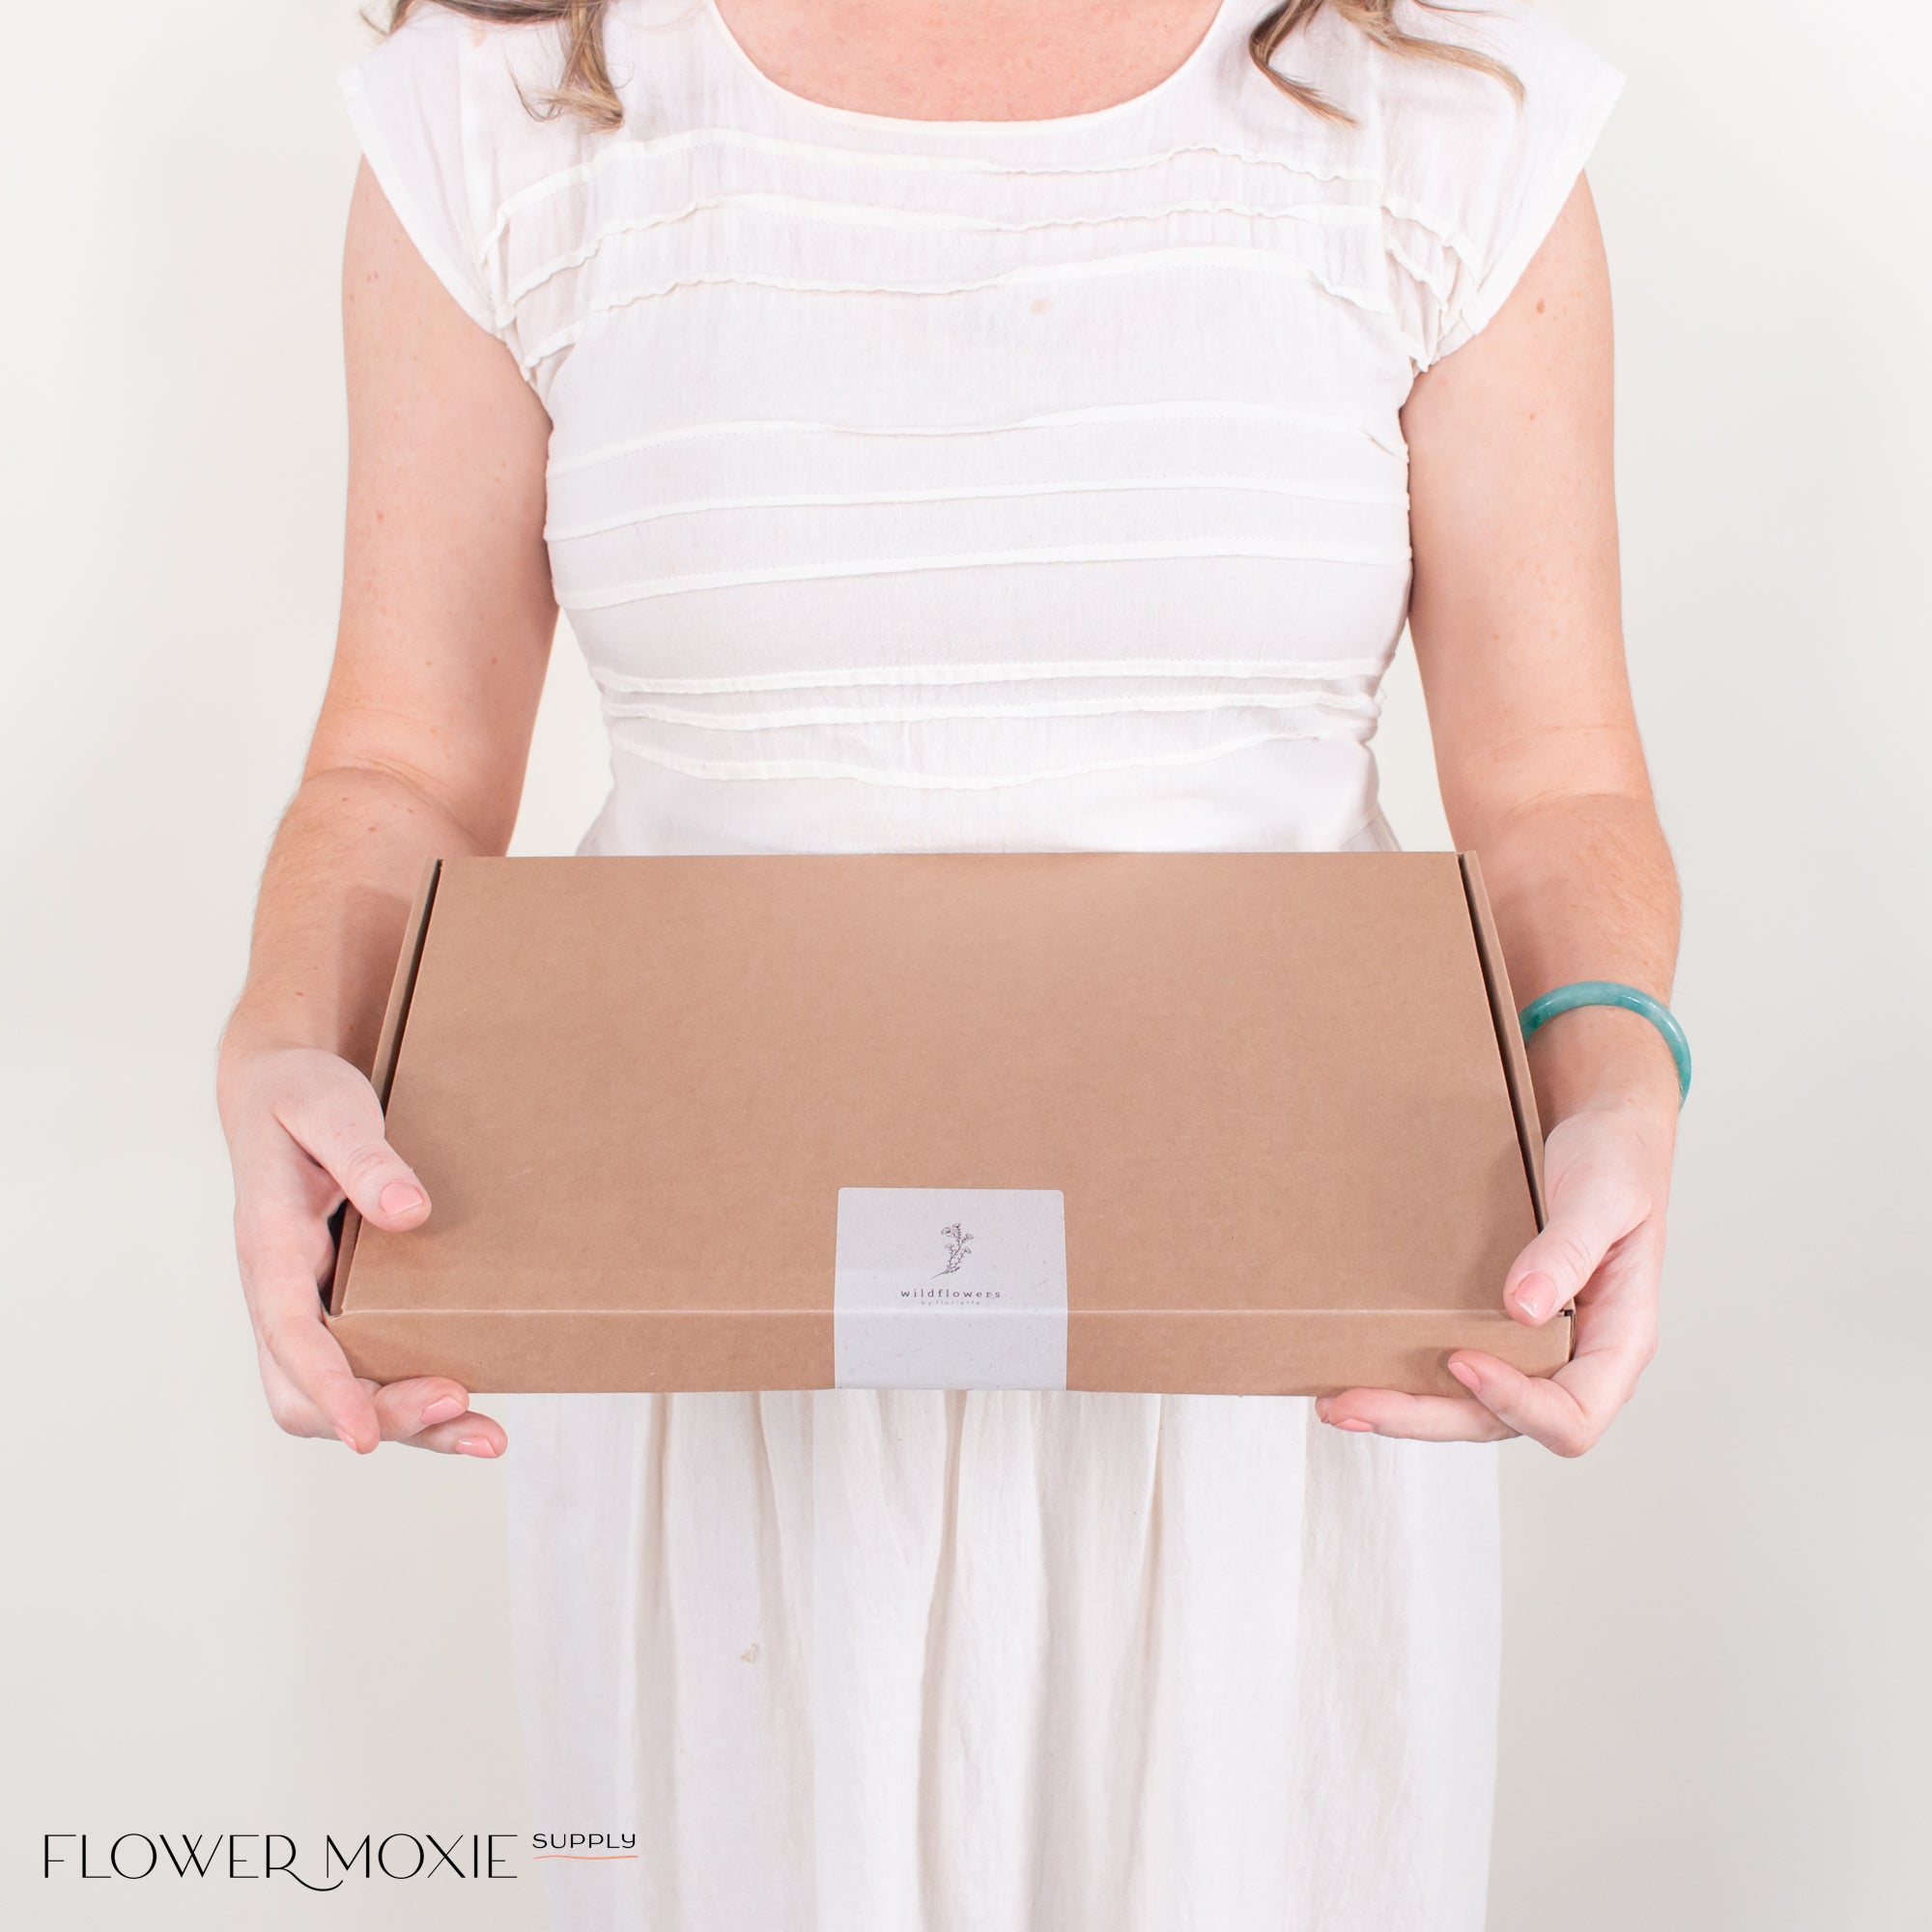 Pink DIY Dried Flowers Box and Ring | Flower Moxie Supply